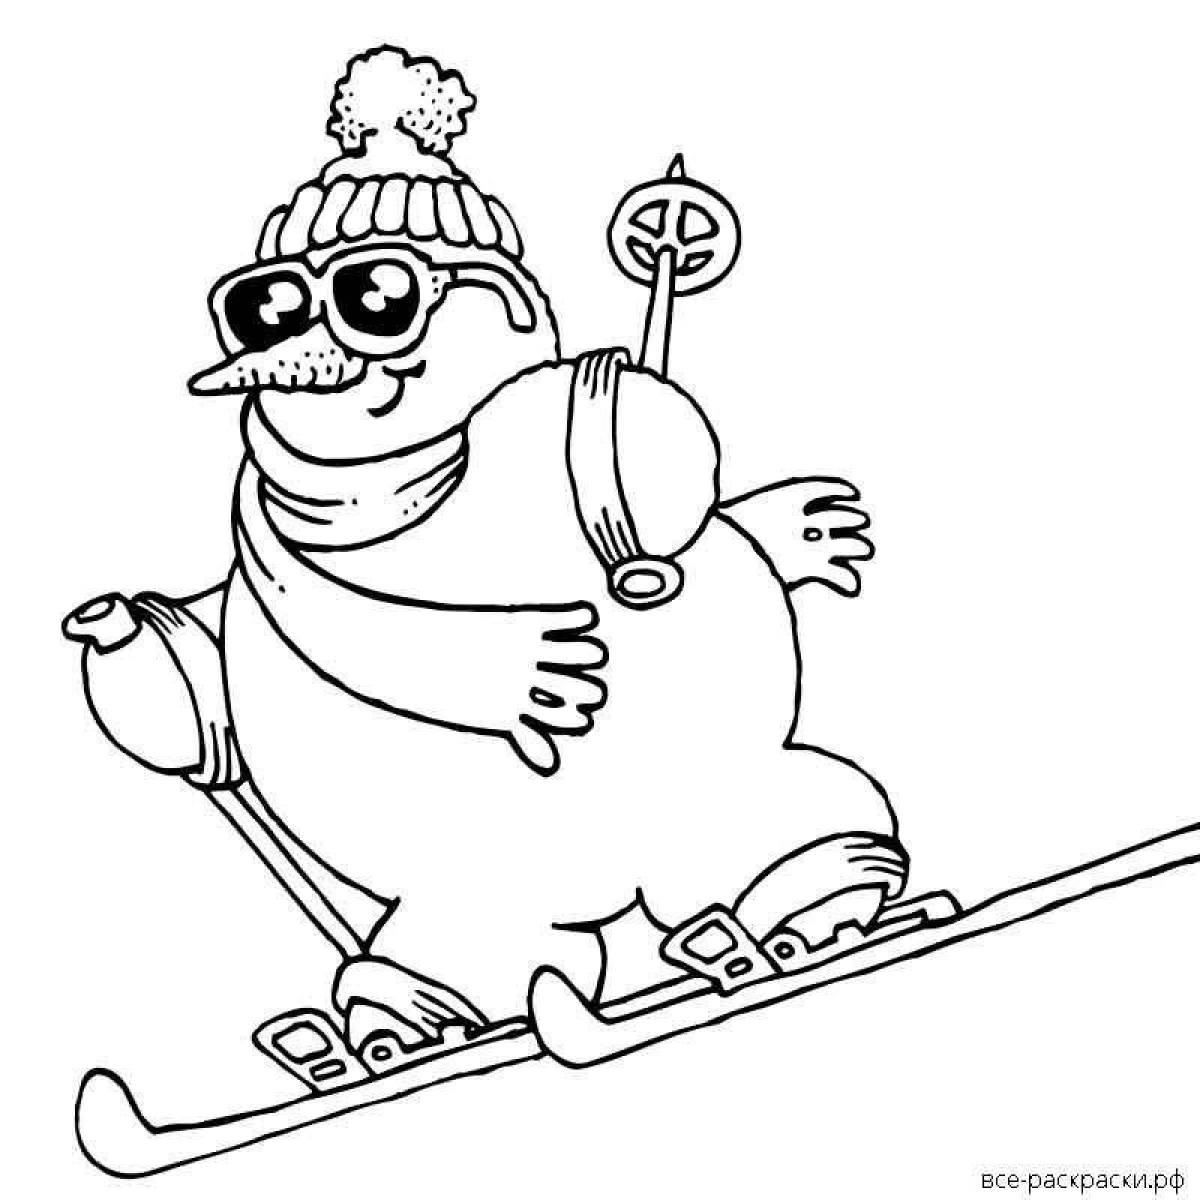 Exciting snowman skiing coloring page